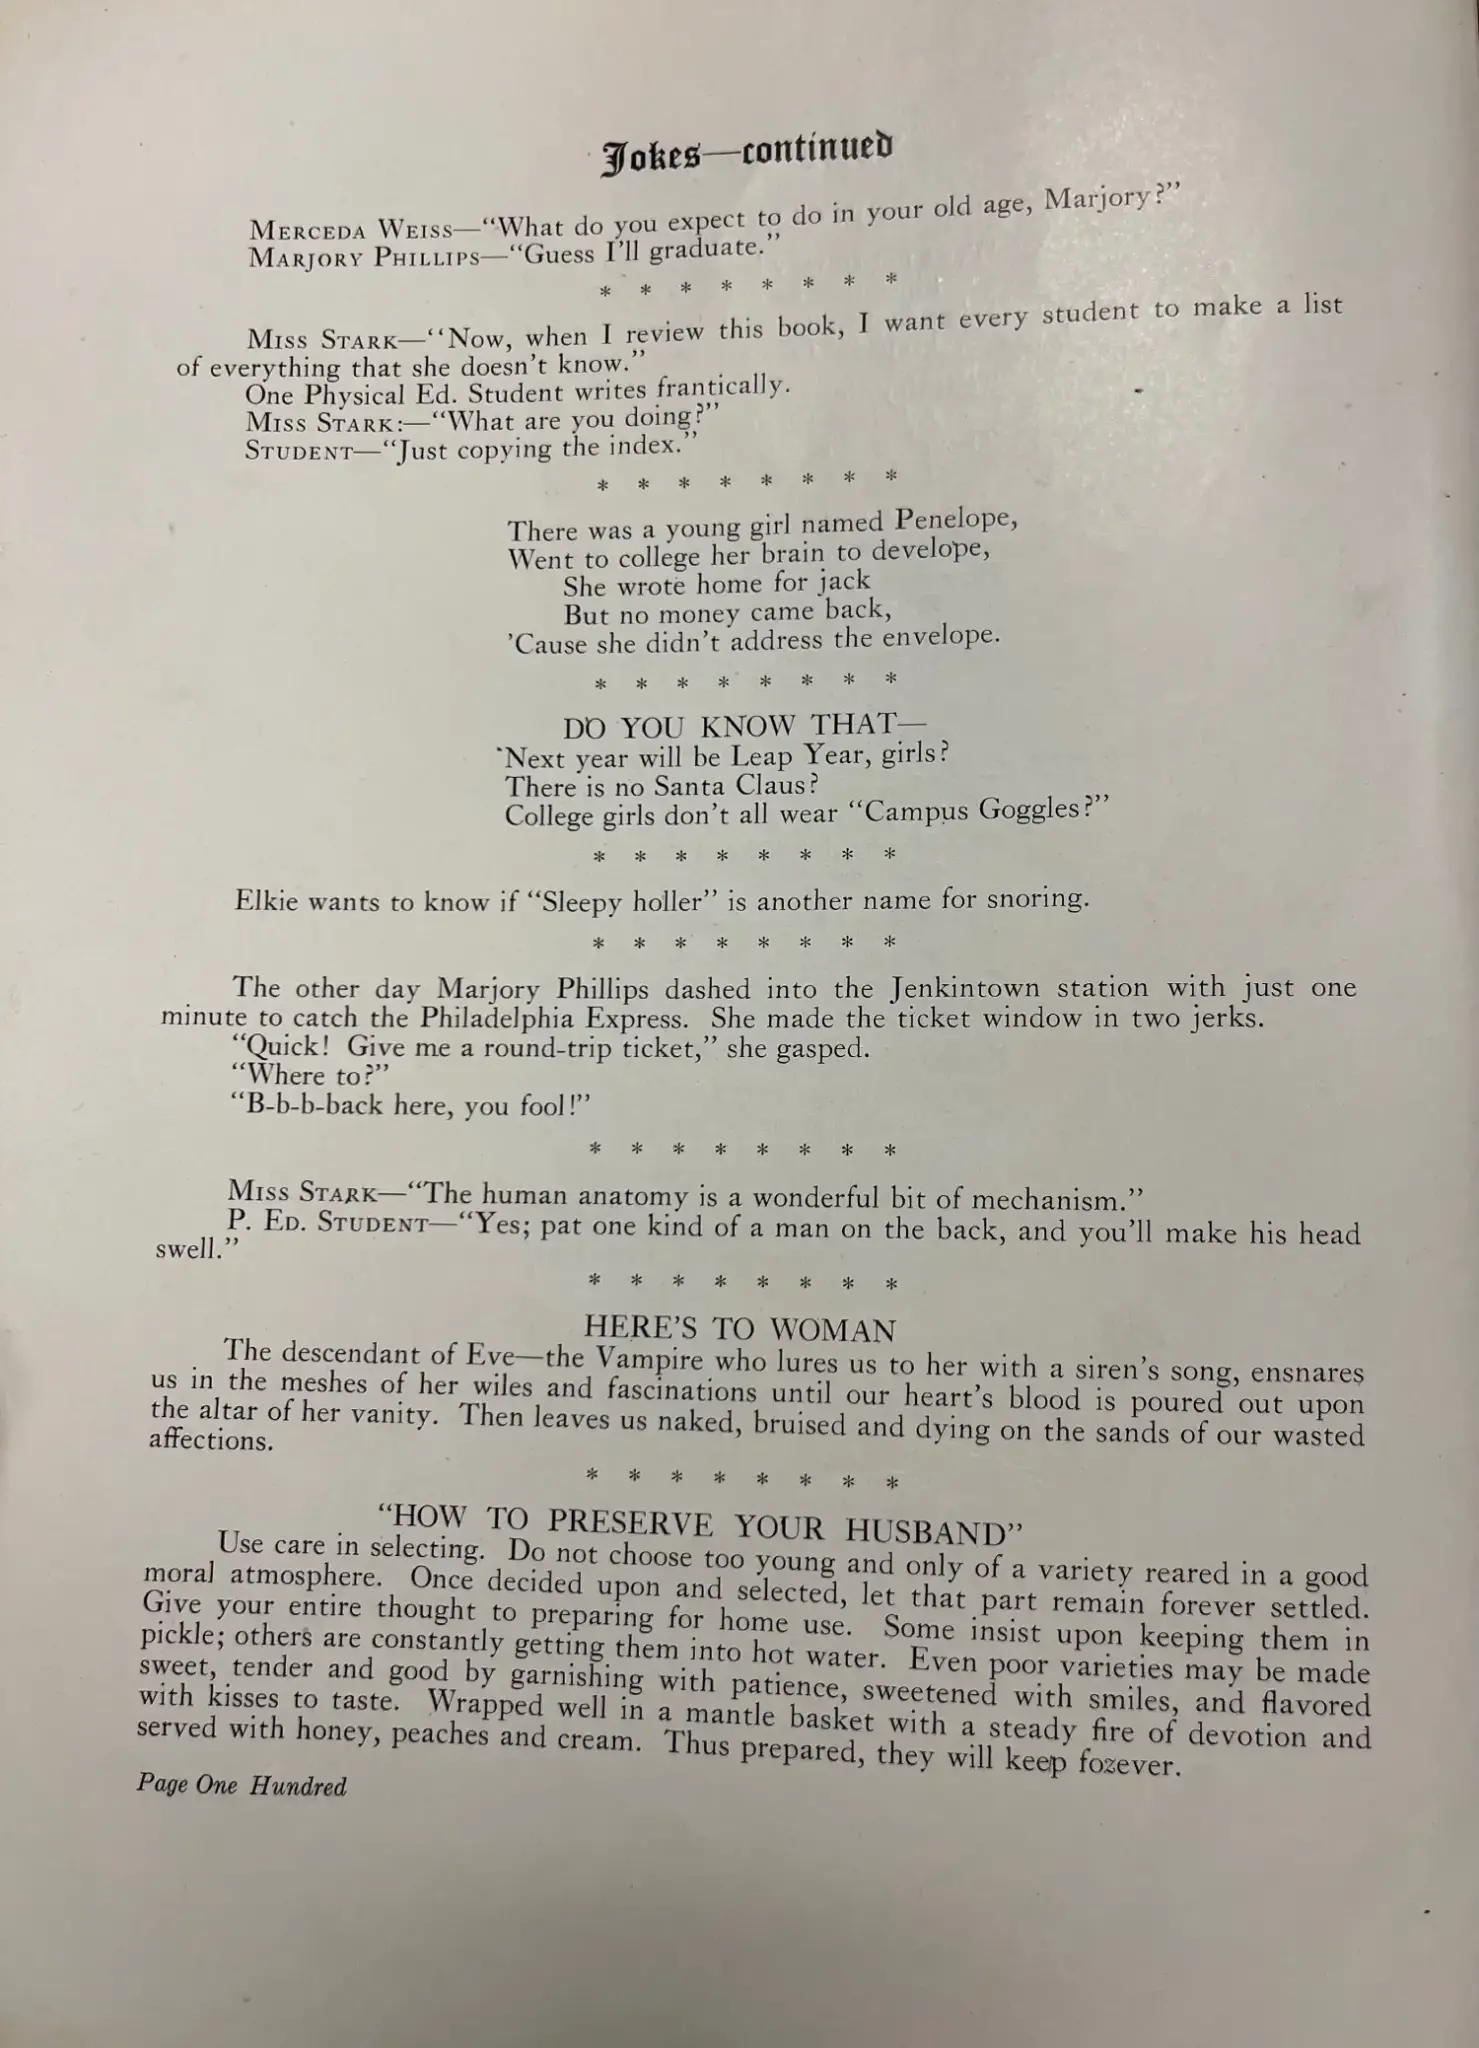 A vintage document, circa 1924, with the headline "Jokes continued"